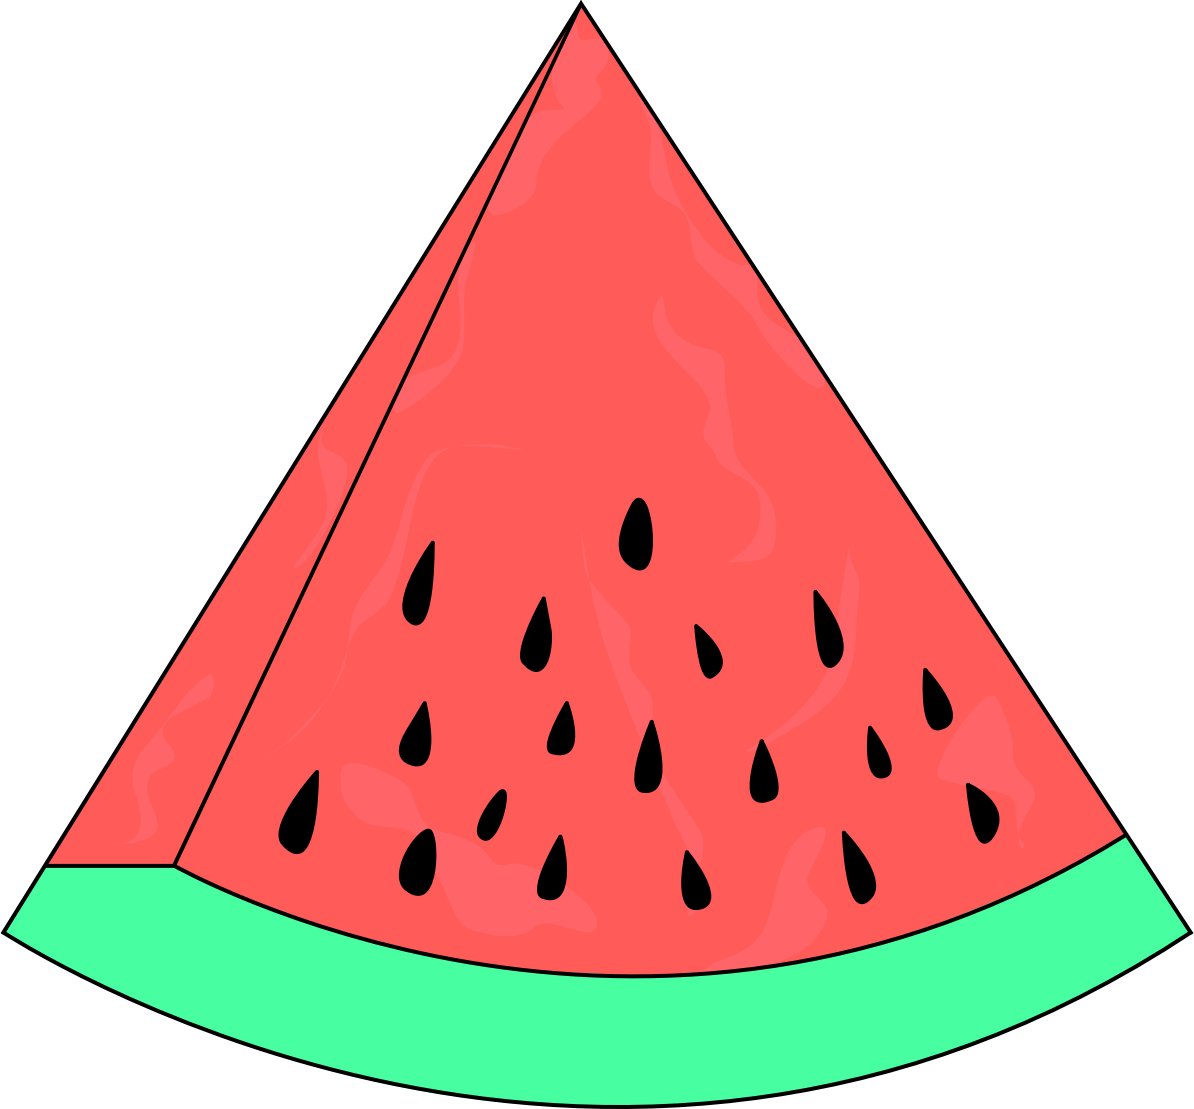 Popular items for watermelon clipart on image 5